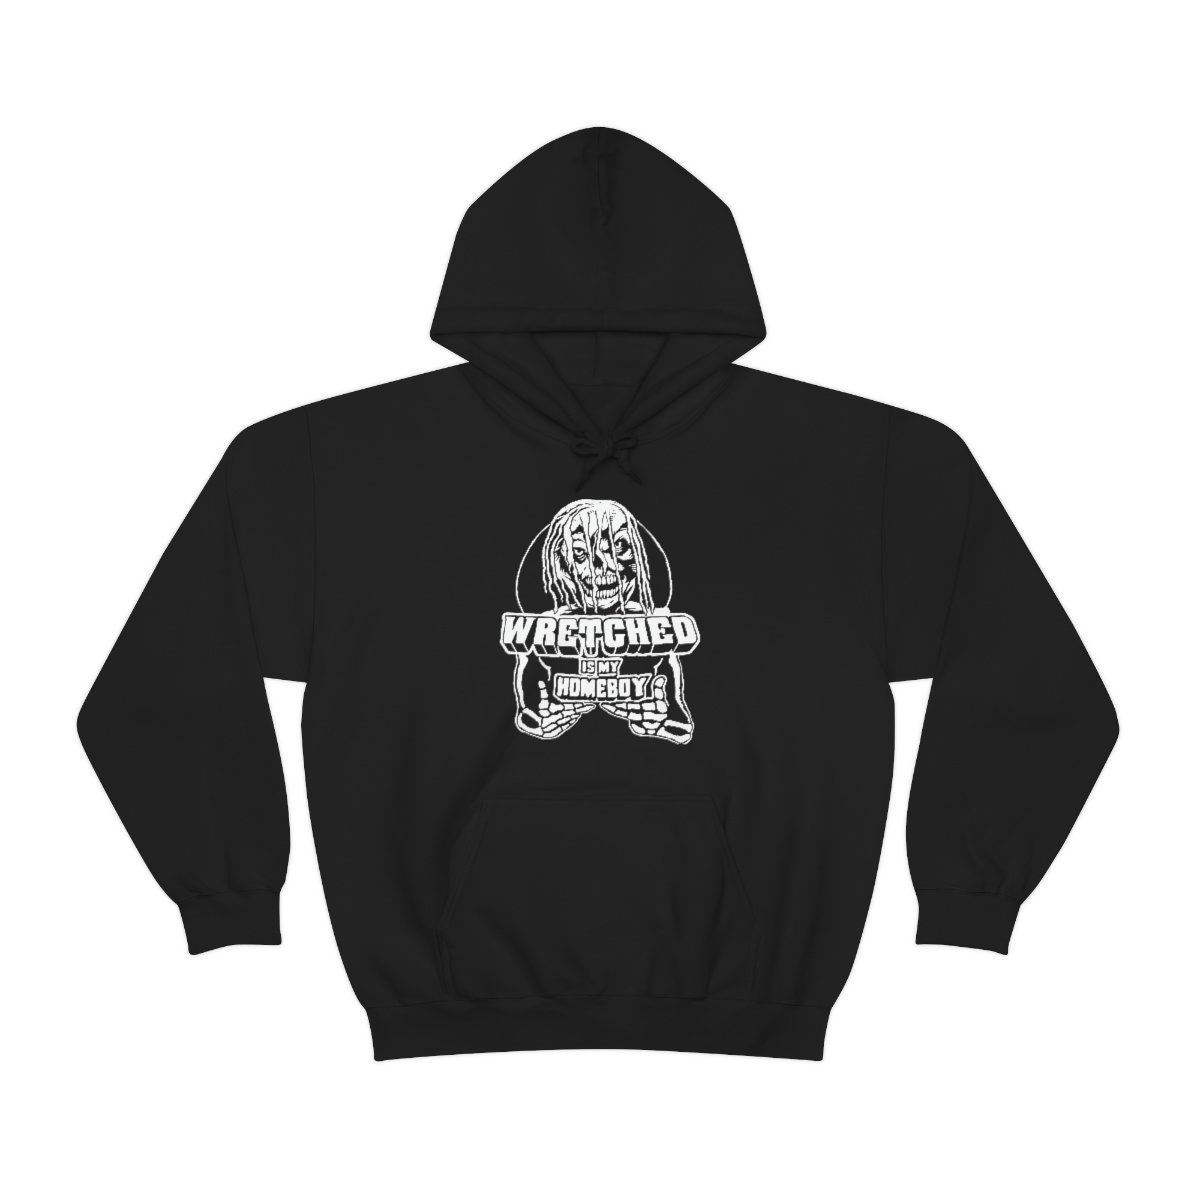 Wretched Graverobber Wretched Is My Homeboy Pullover Hooded Sweatshirt